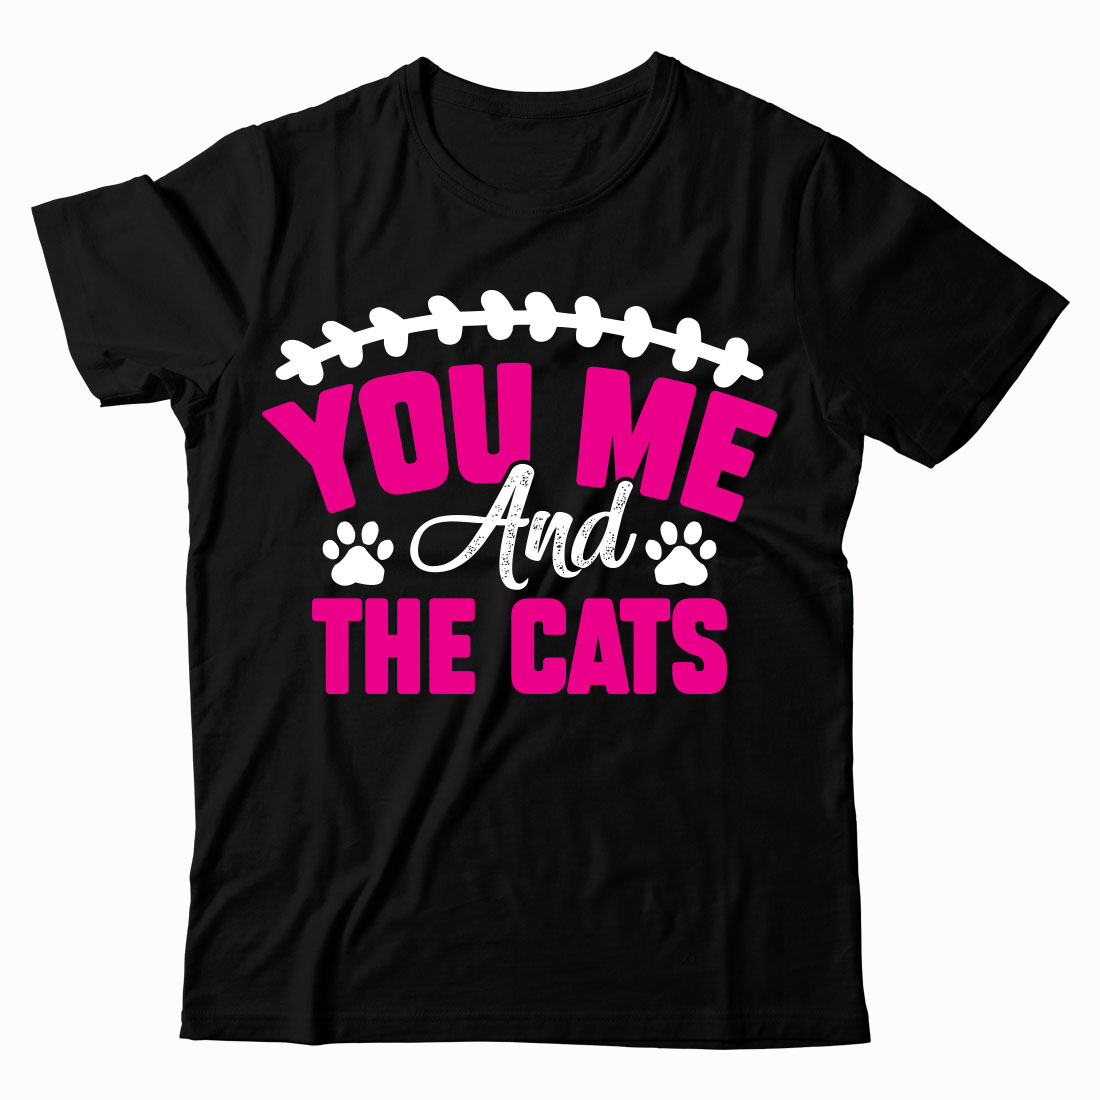 T - shirt that says you me and the cats.